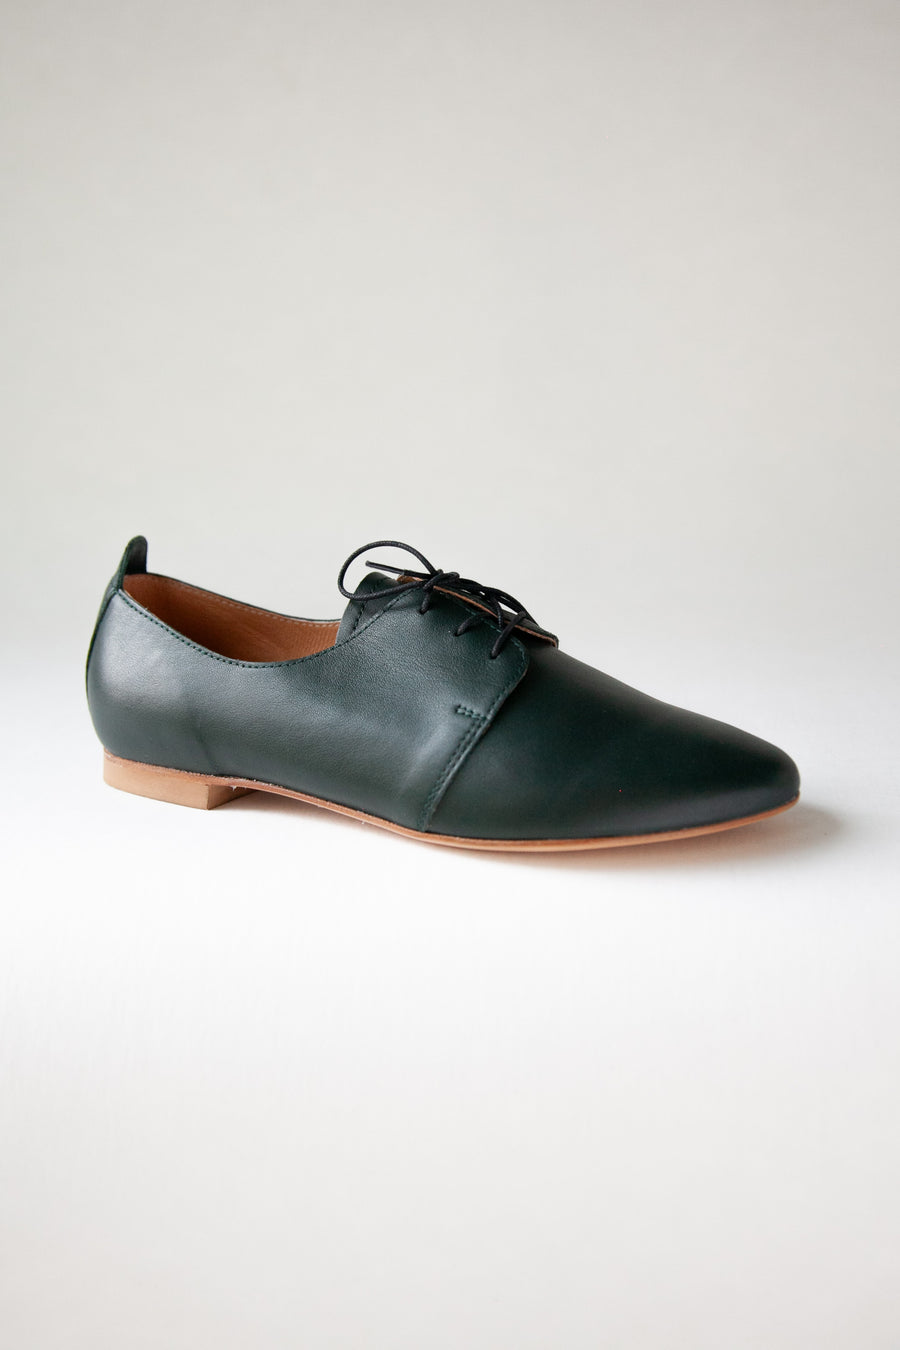 DArk green laced shoes against white background